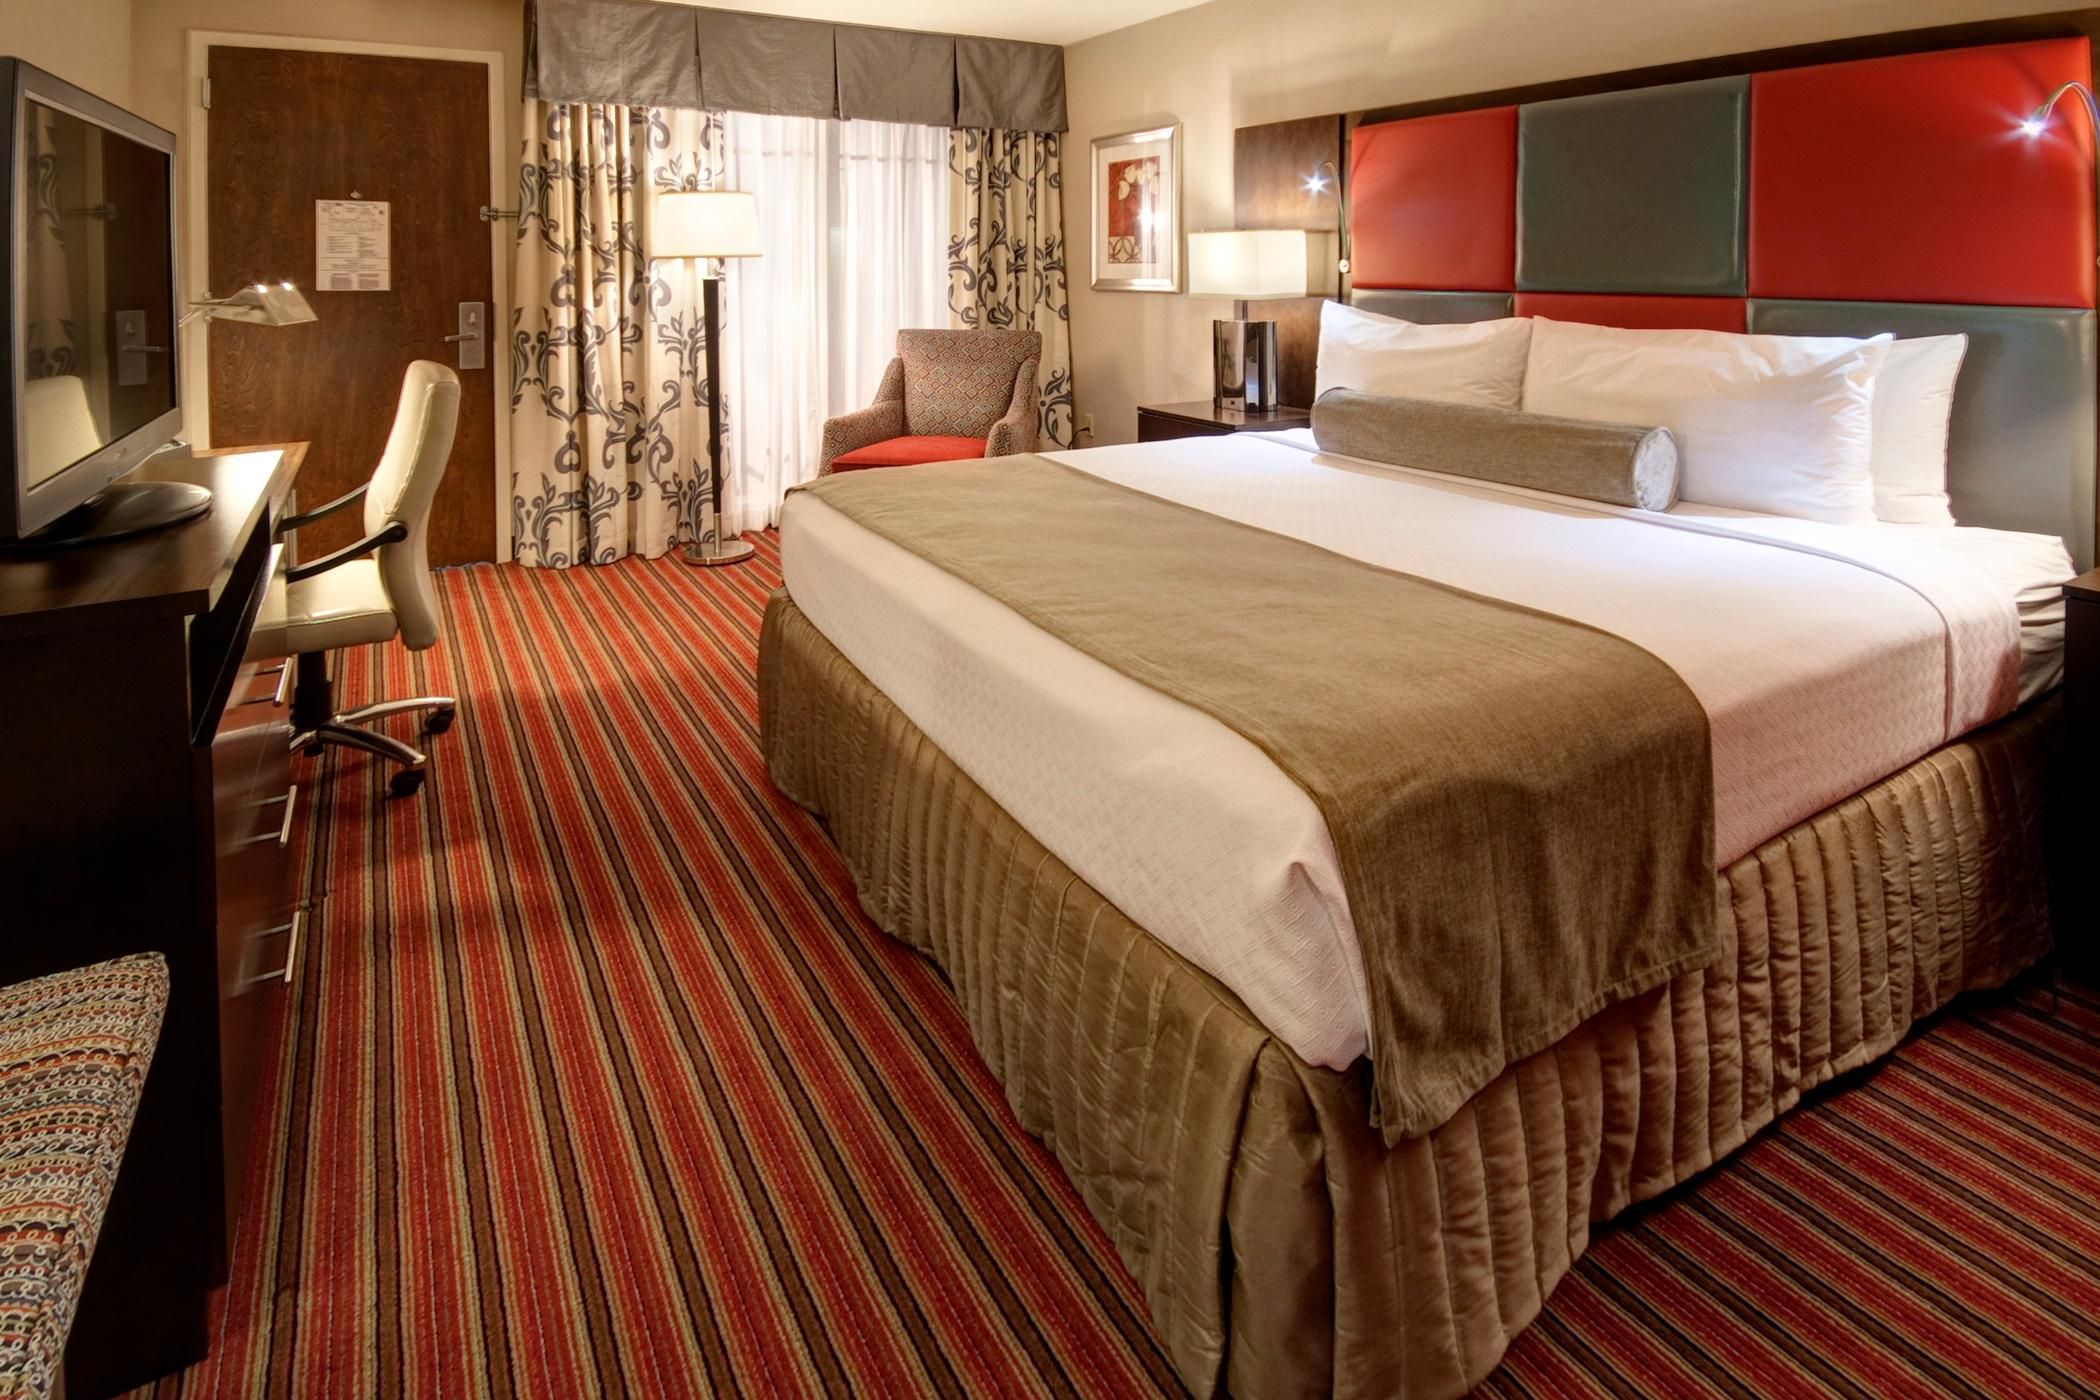 Our king rooms are designed for corporate &amp; leisure traveler alike